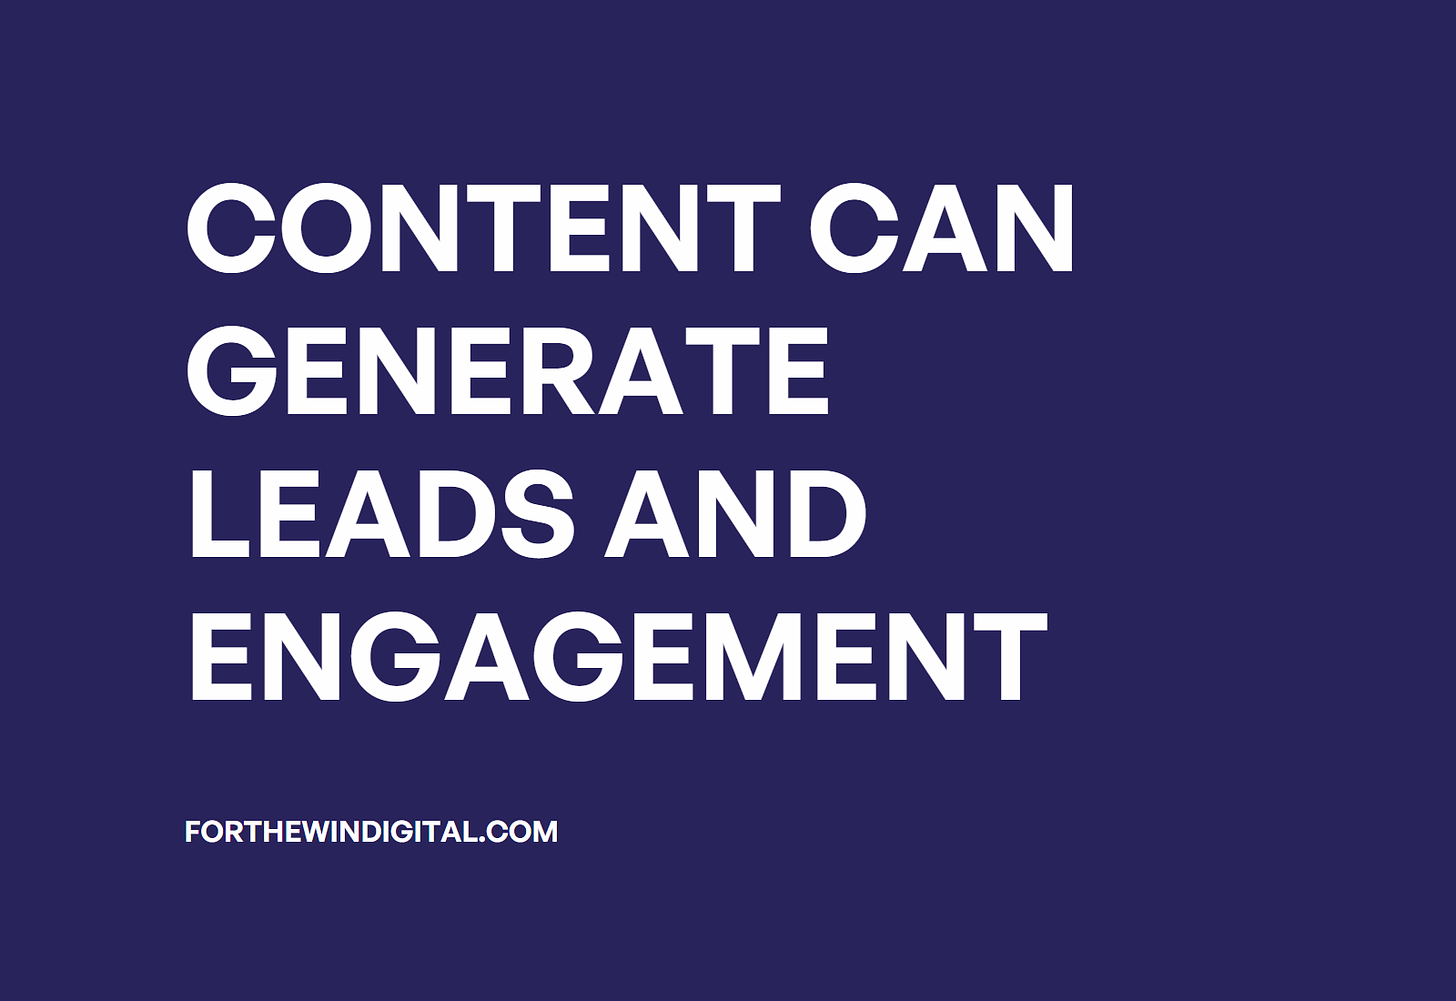 Content can generate leads and engagement